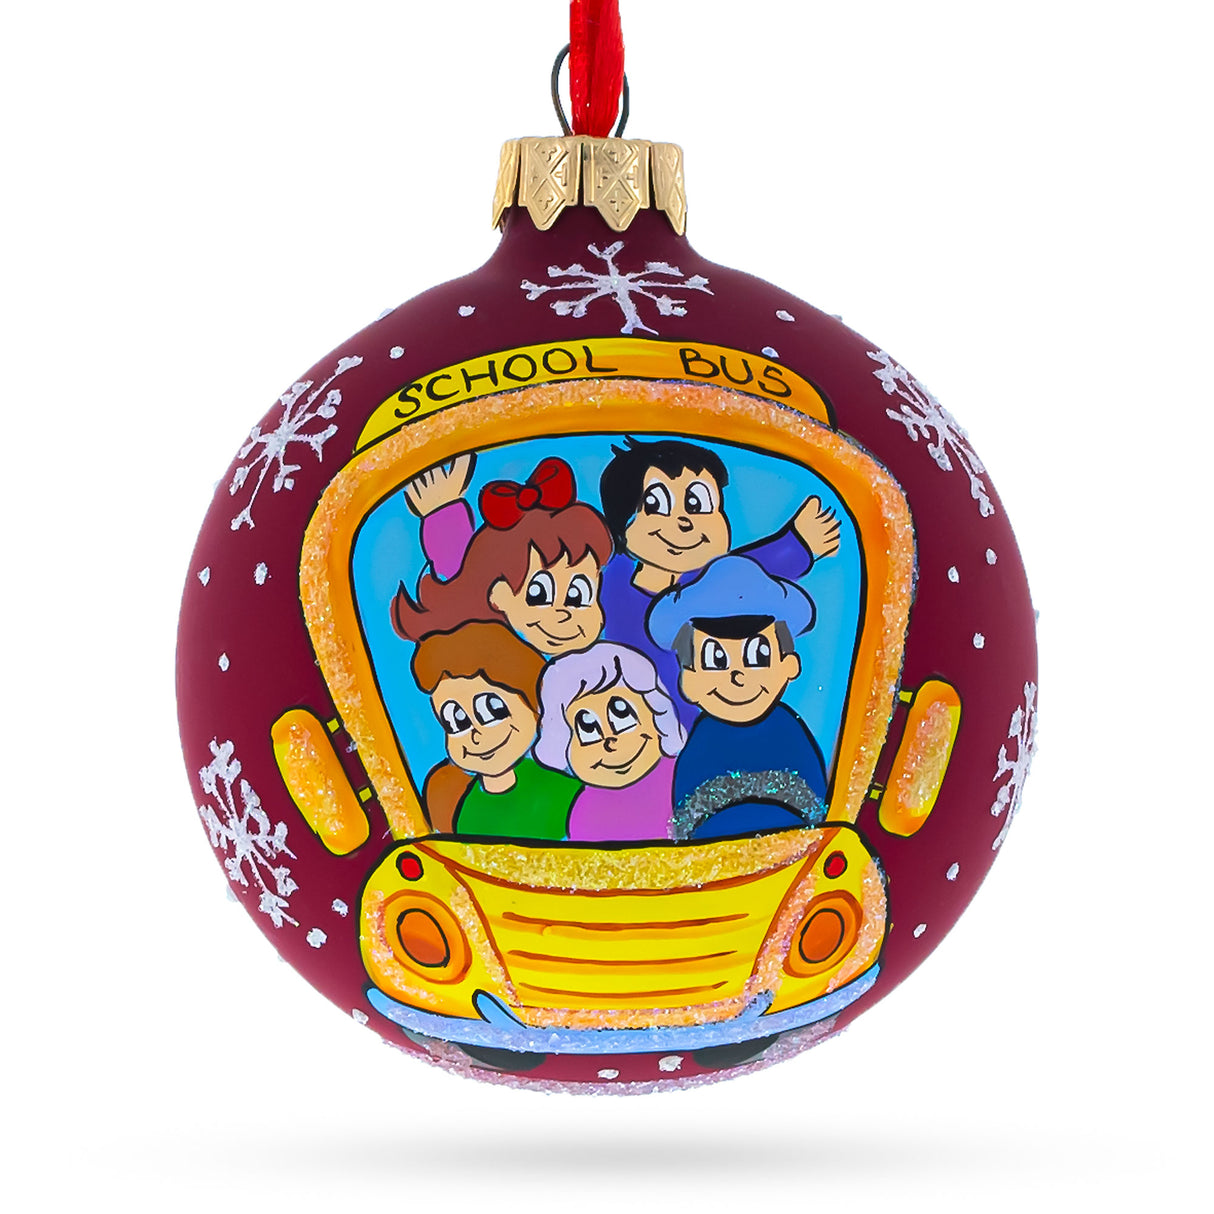 Glass Classic Yellow School Bus Blown Glass Christmas Ornament 3.25 Inches in Red color Round